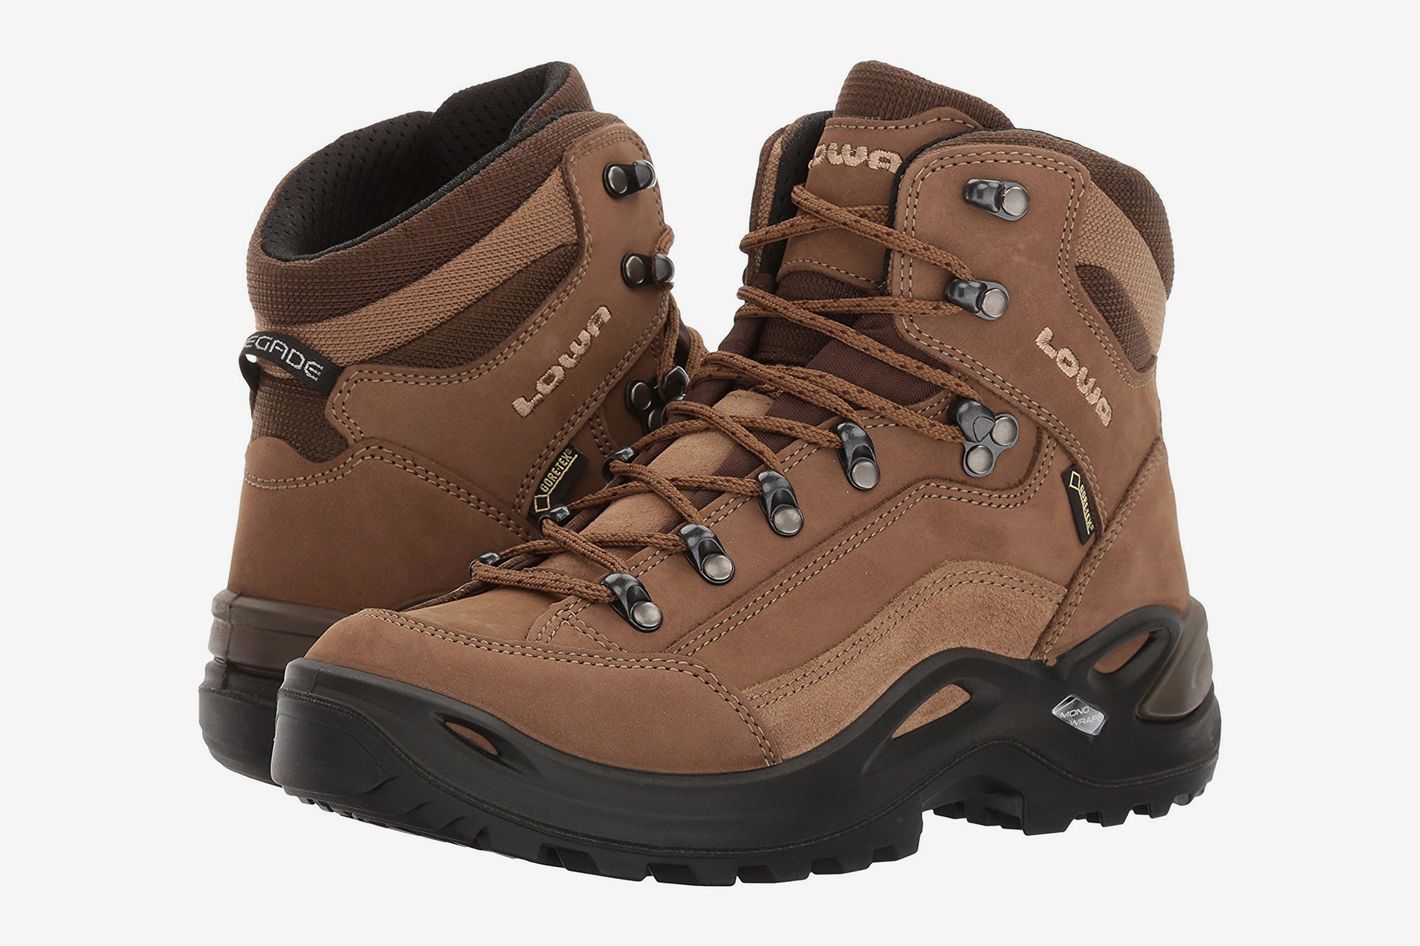 Womens Hiking Boot Brands : Keen footwear is for all your outdoor needs ...